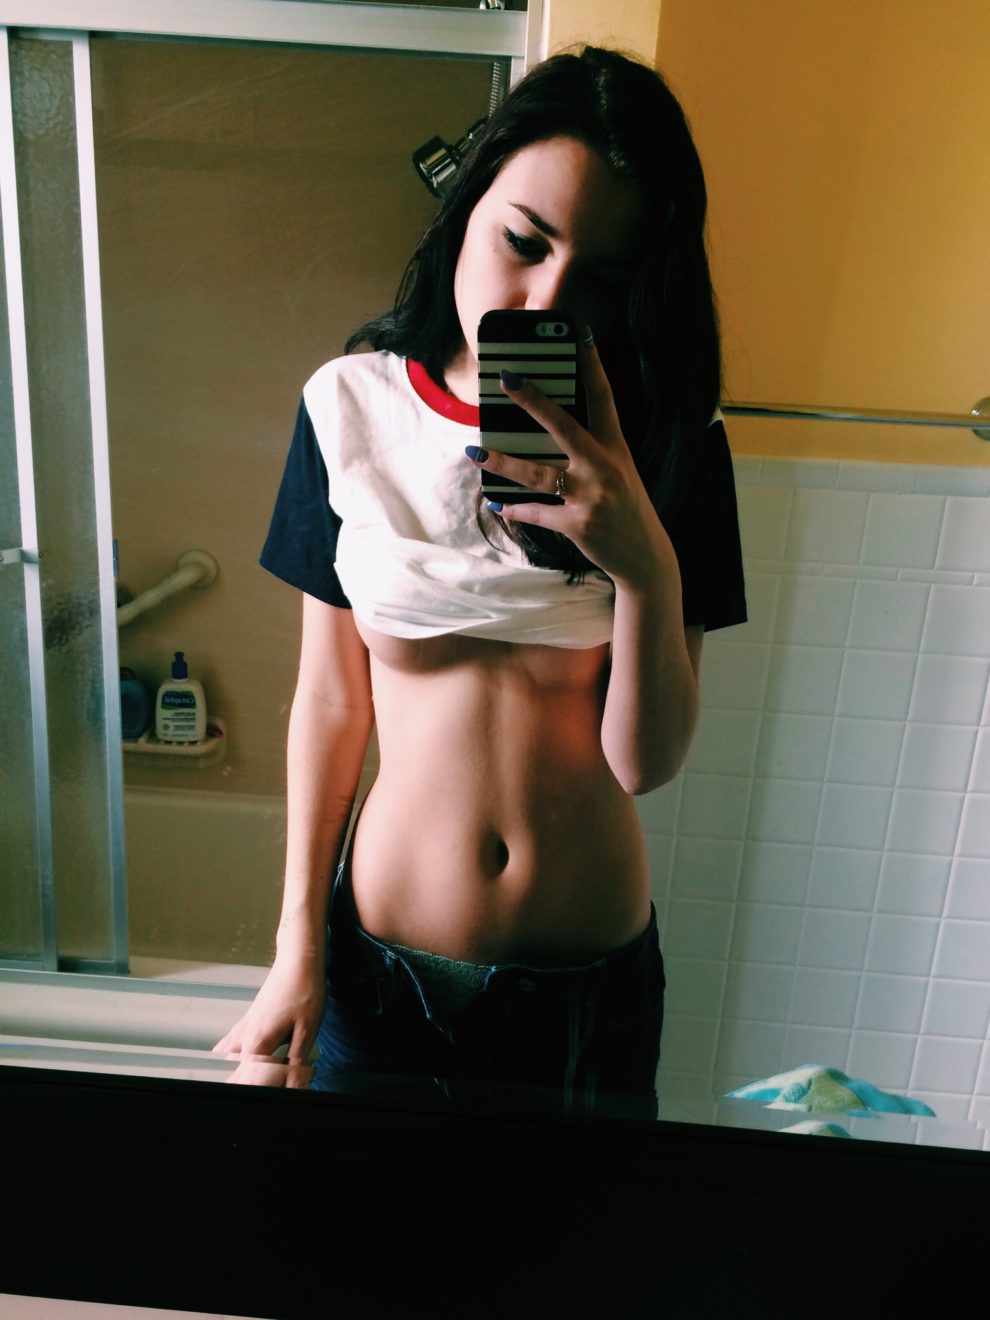 Showing off her abs